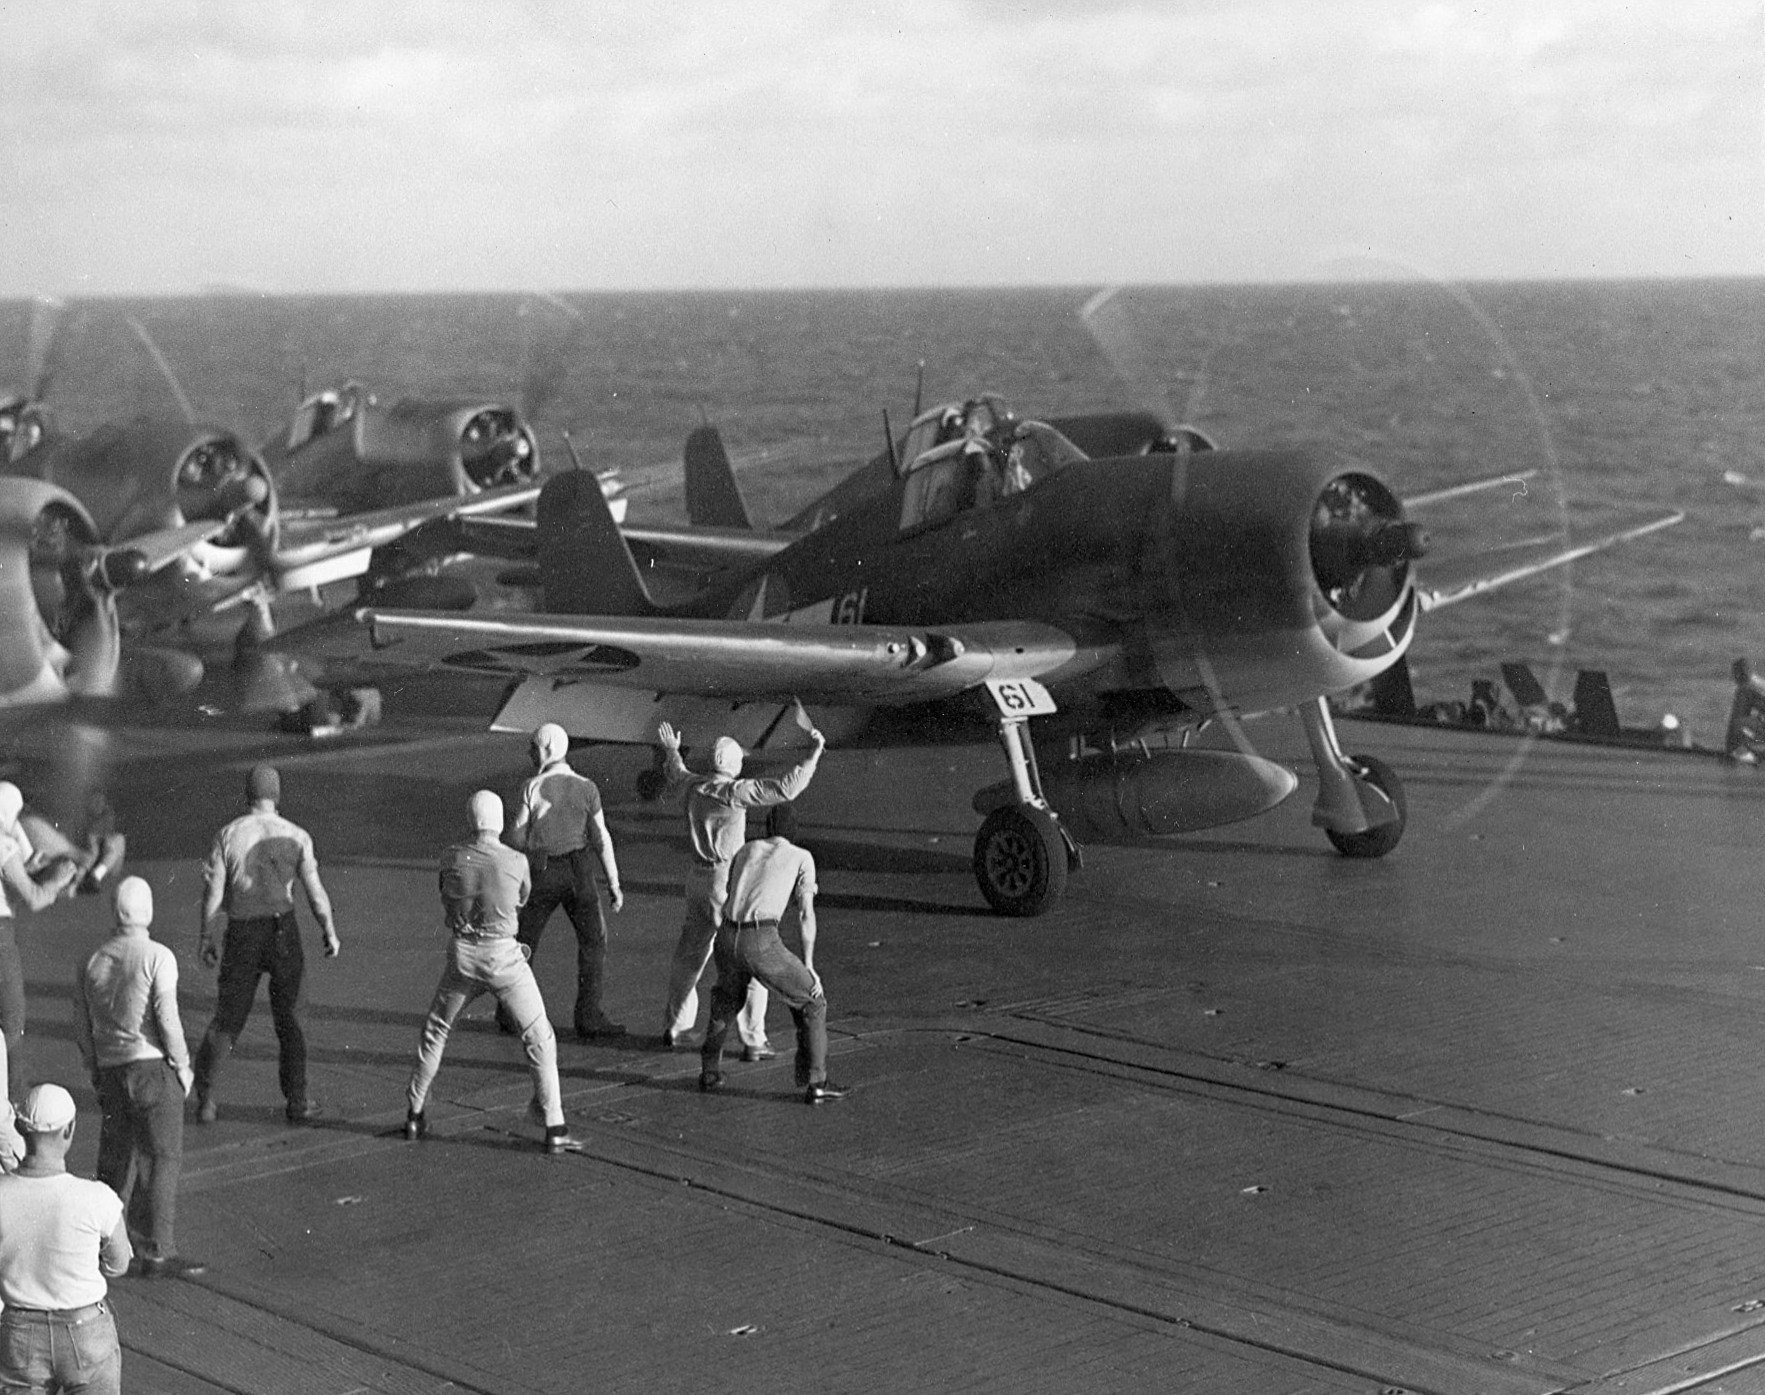 F6F Hellcat fighters going through launch procedures aboard the carrier Saratoga, off Gilbert Islands, early 1943.